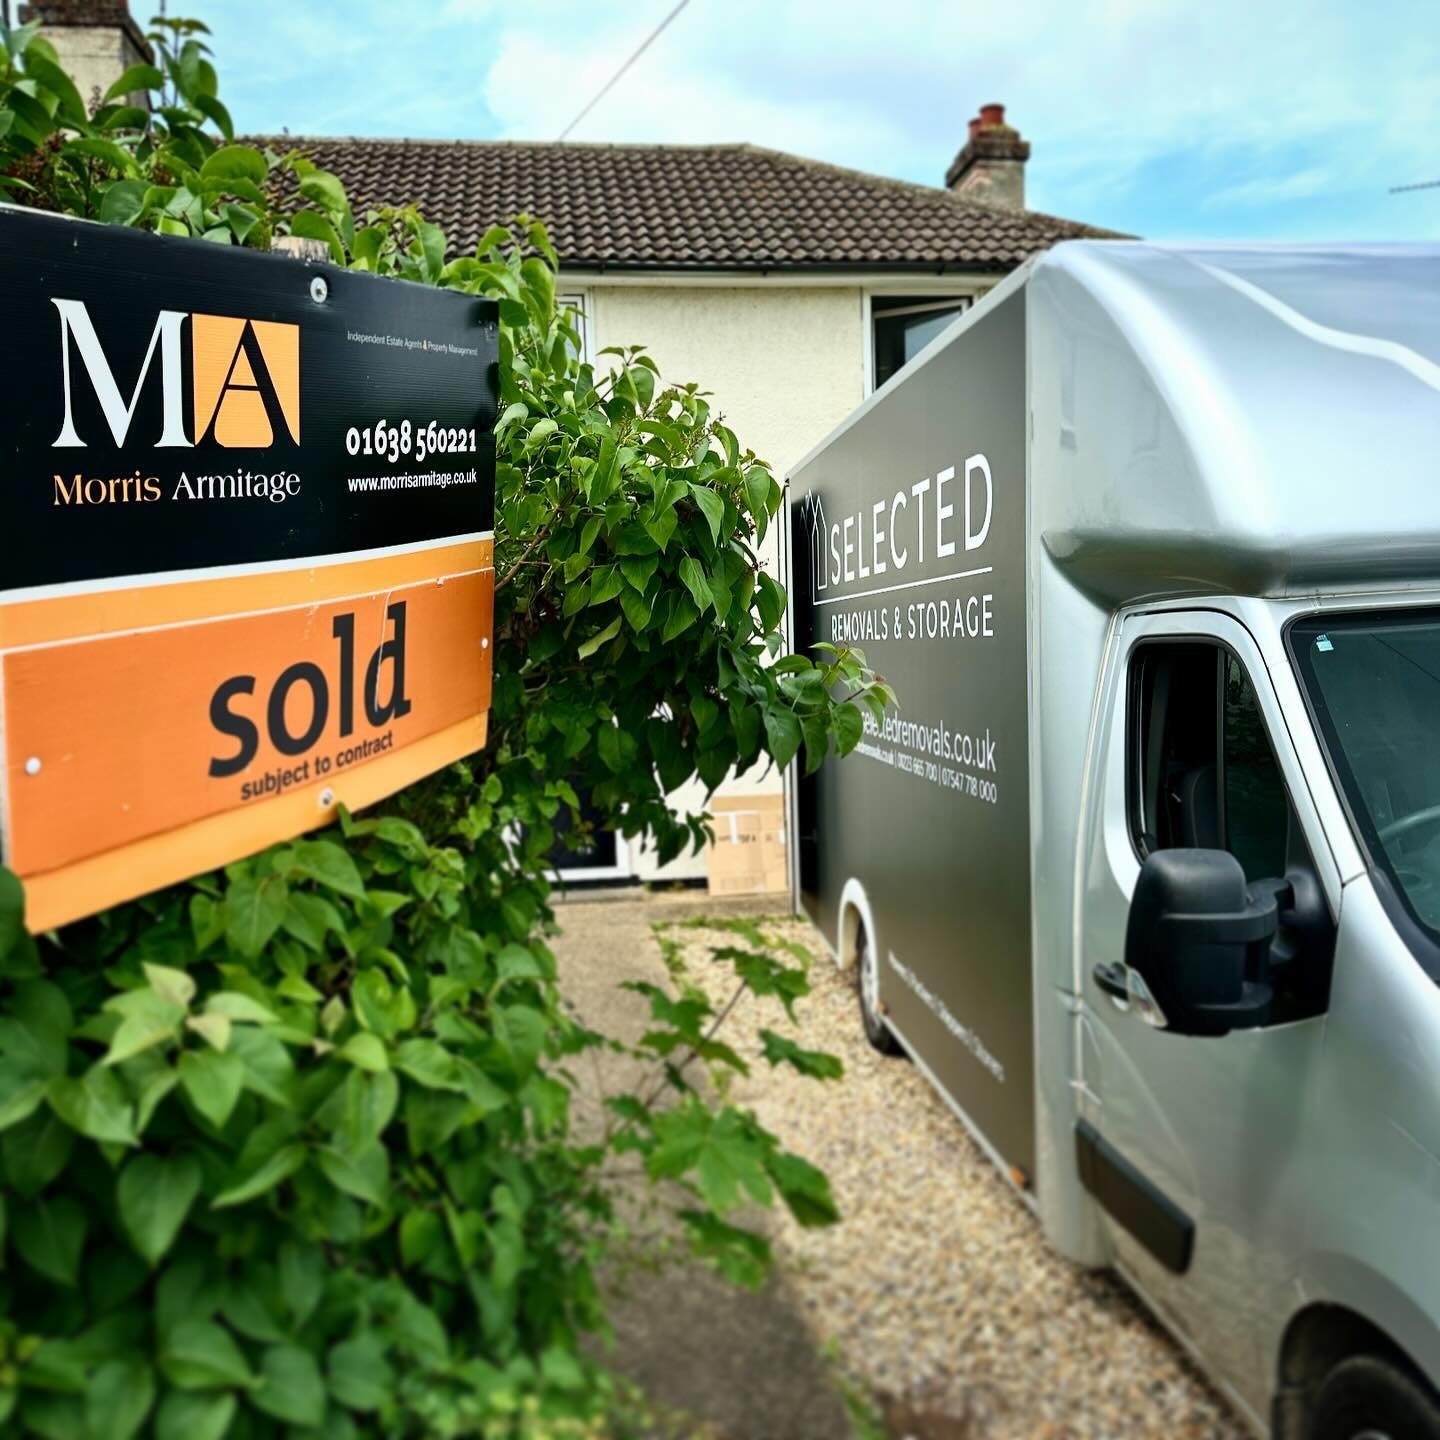 Cambridge to Waterbeach 🚚🚚✅
Newmarket to Newmarket 🚚✅

Today&rsquo;s item highlights across our moves included a deliciously heavy upright piano and not so small trampoline 😂🫡

Great to have the sun back keeping us company and we wish you all a 